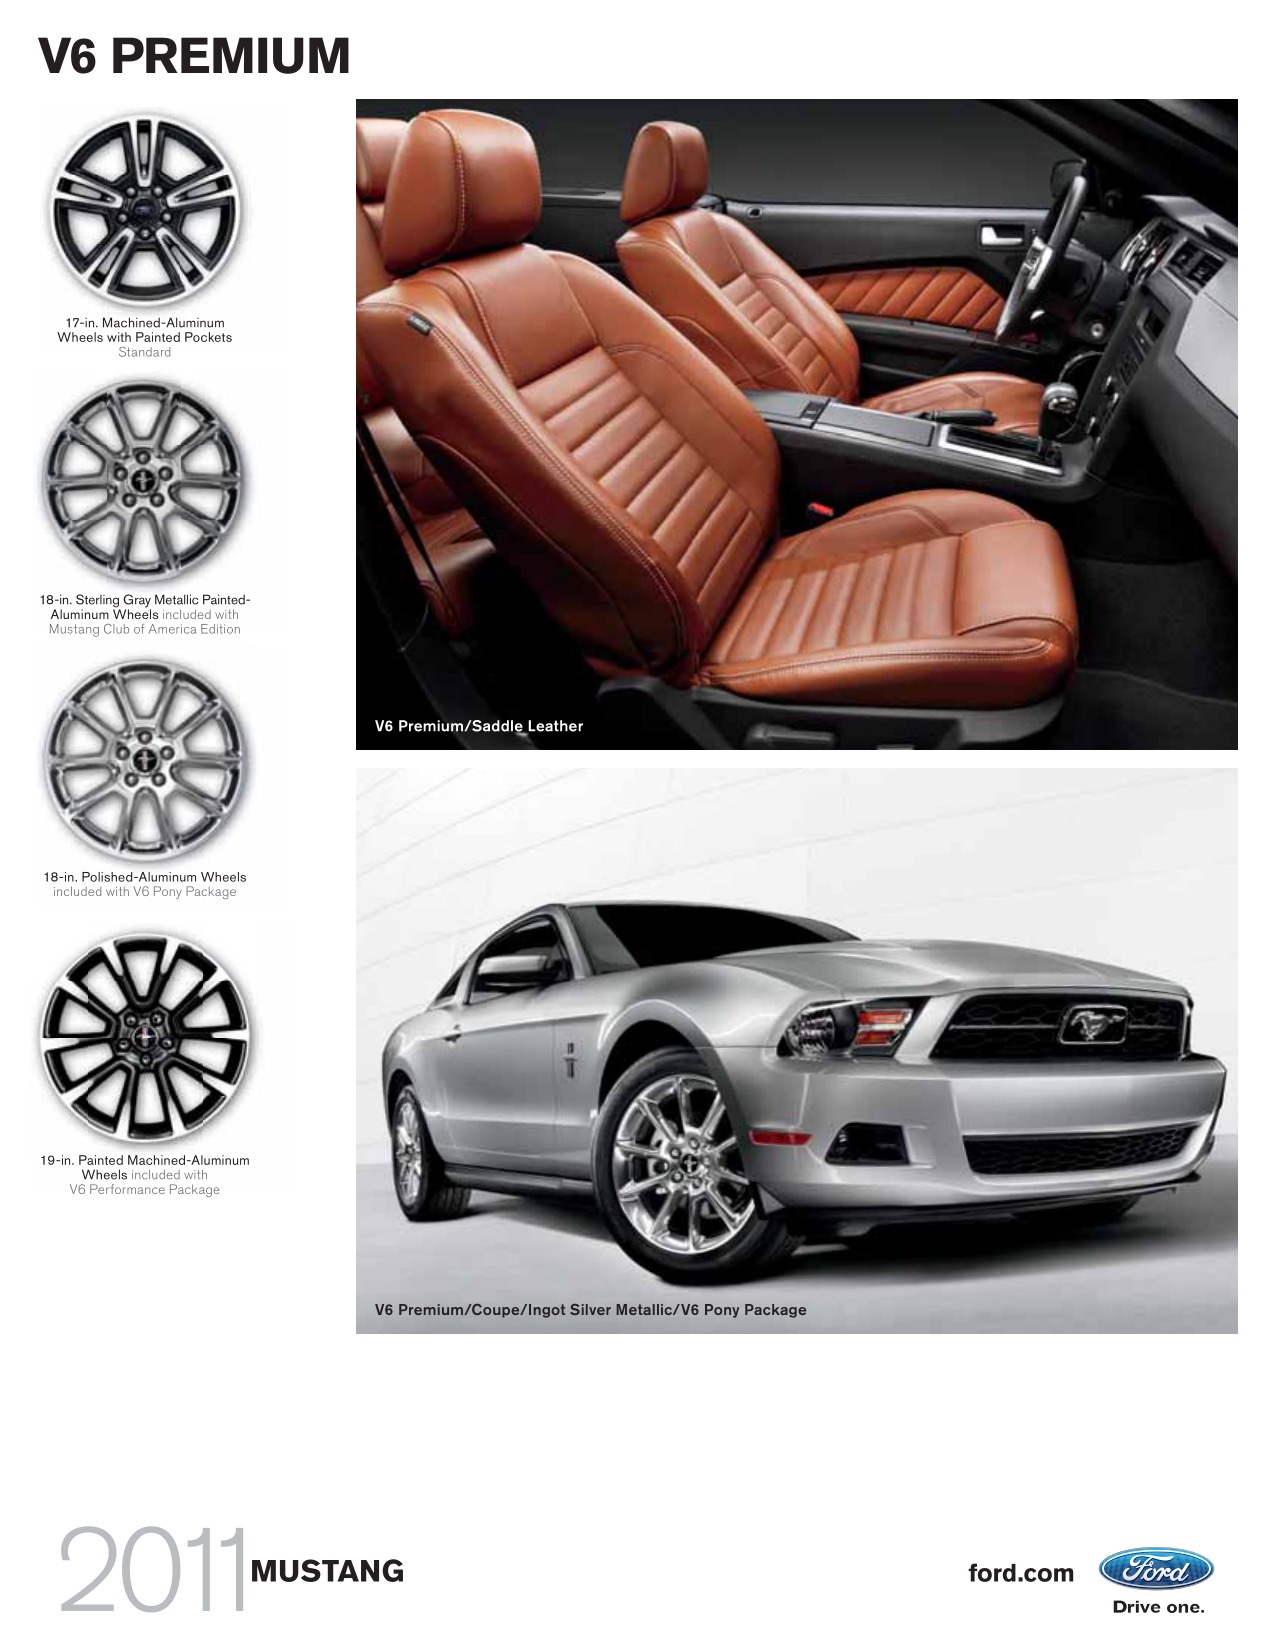 2011 Ford Mustang Brochure Page 1